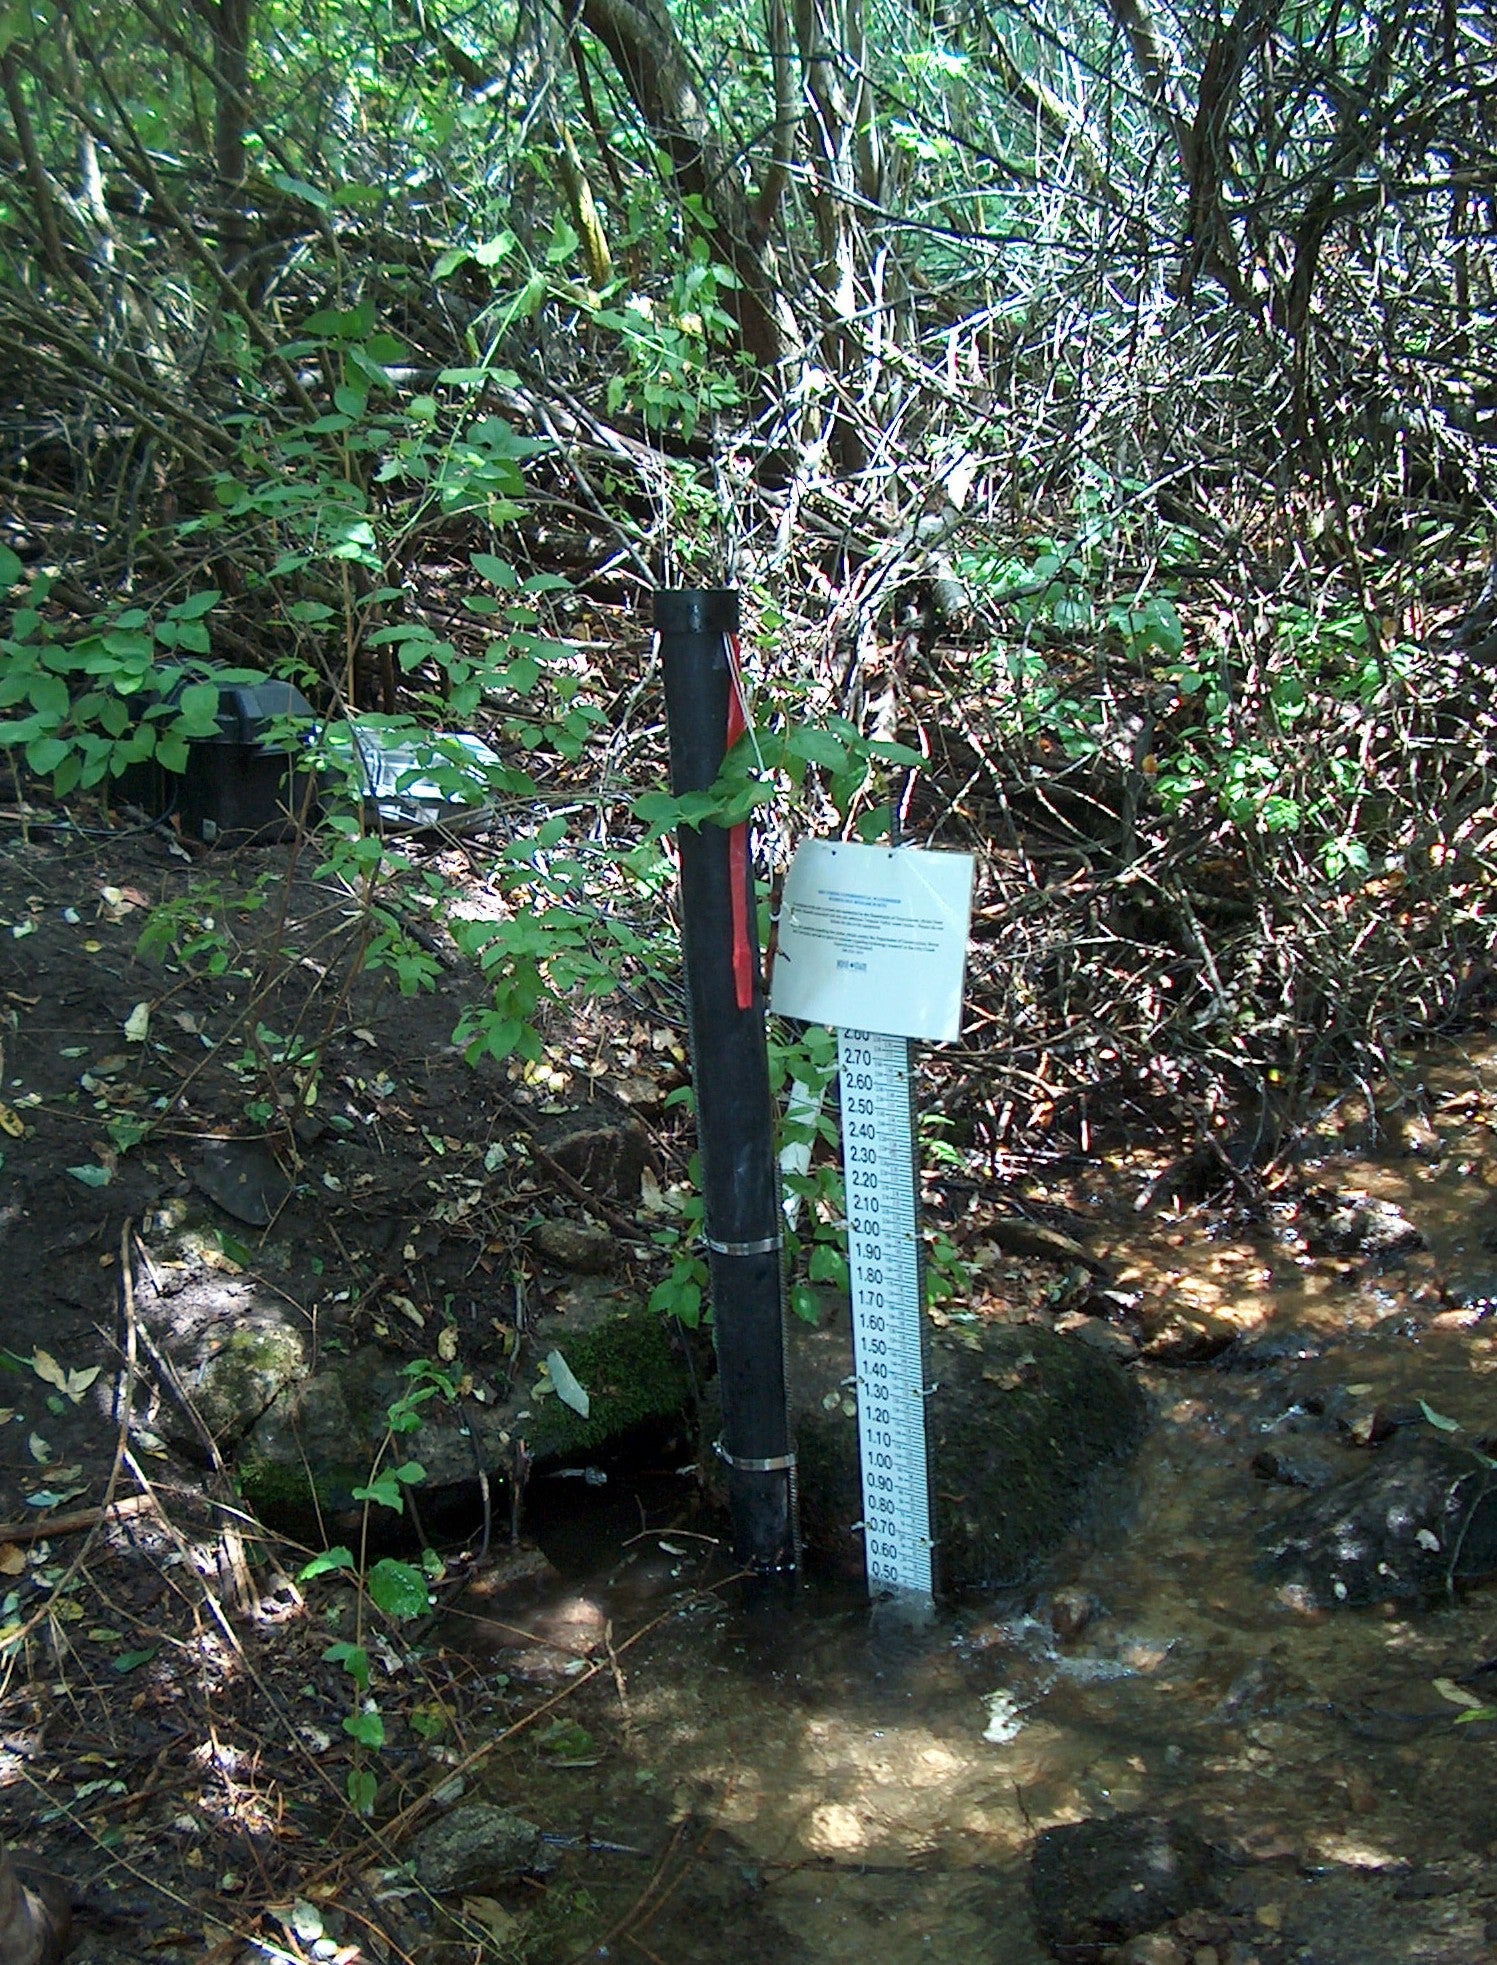 measurement sticks for river height